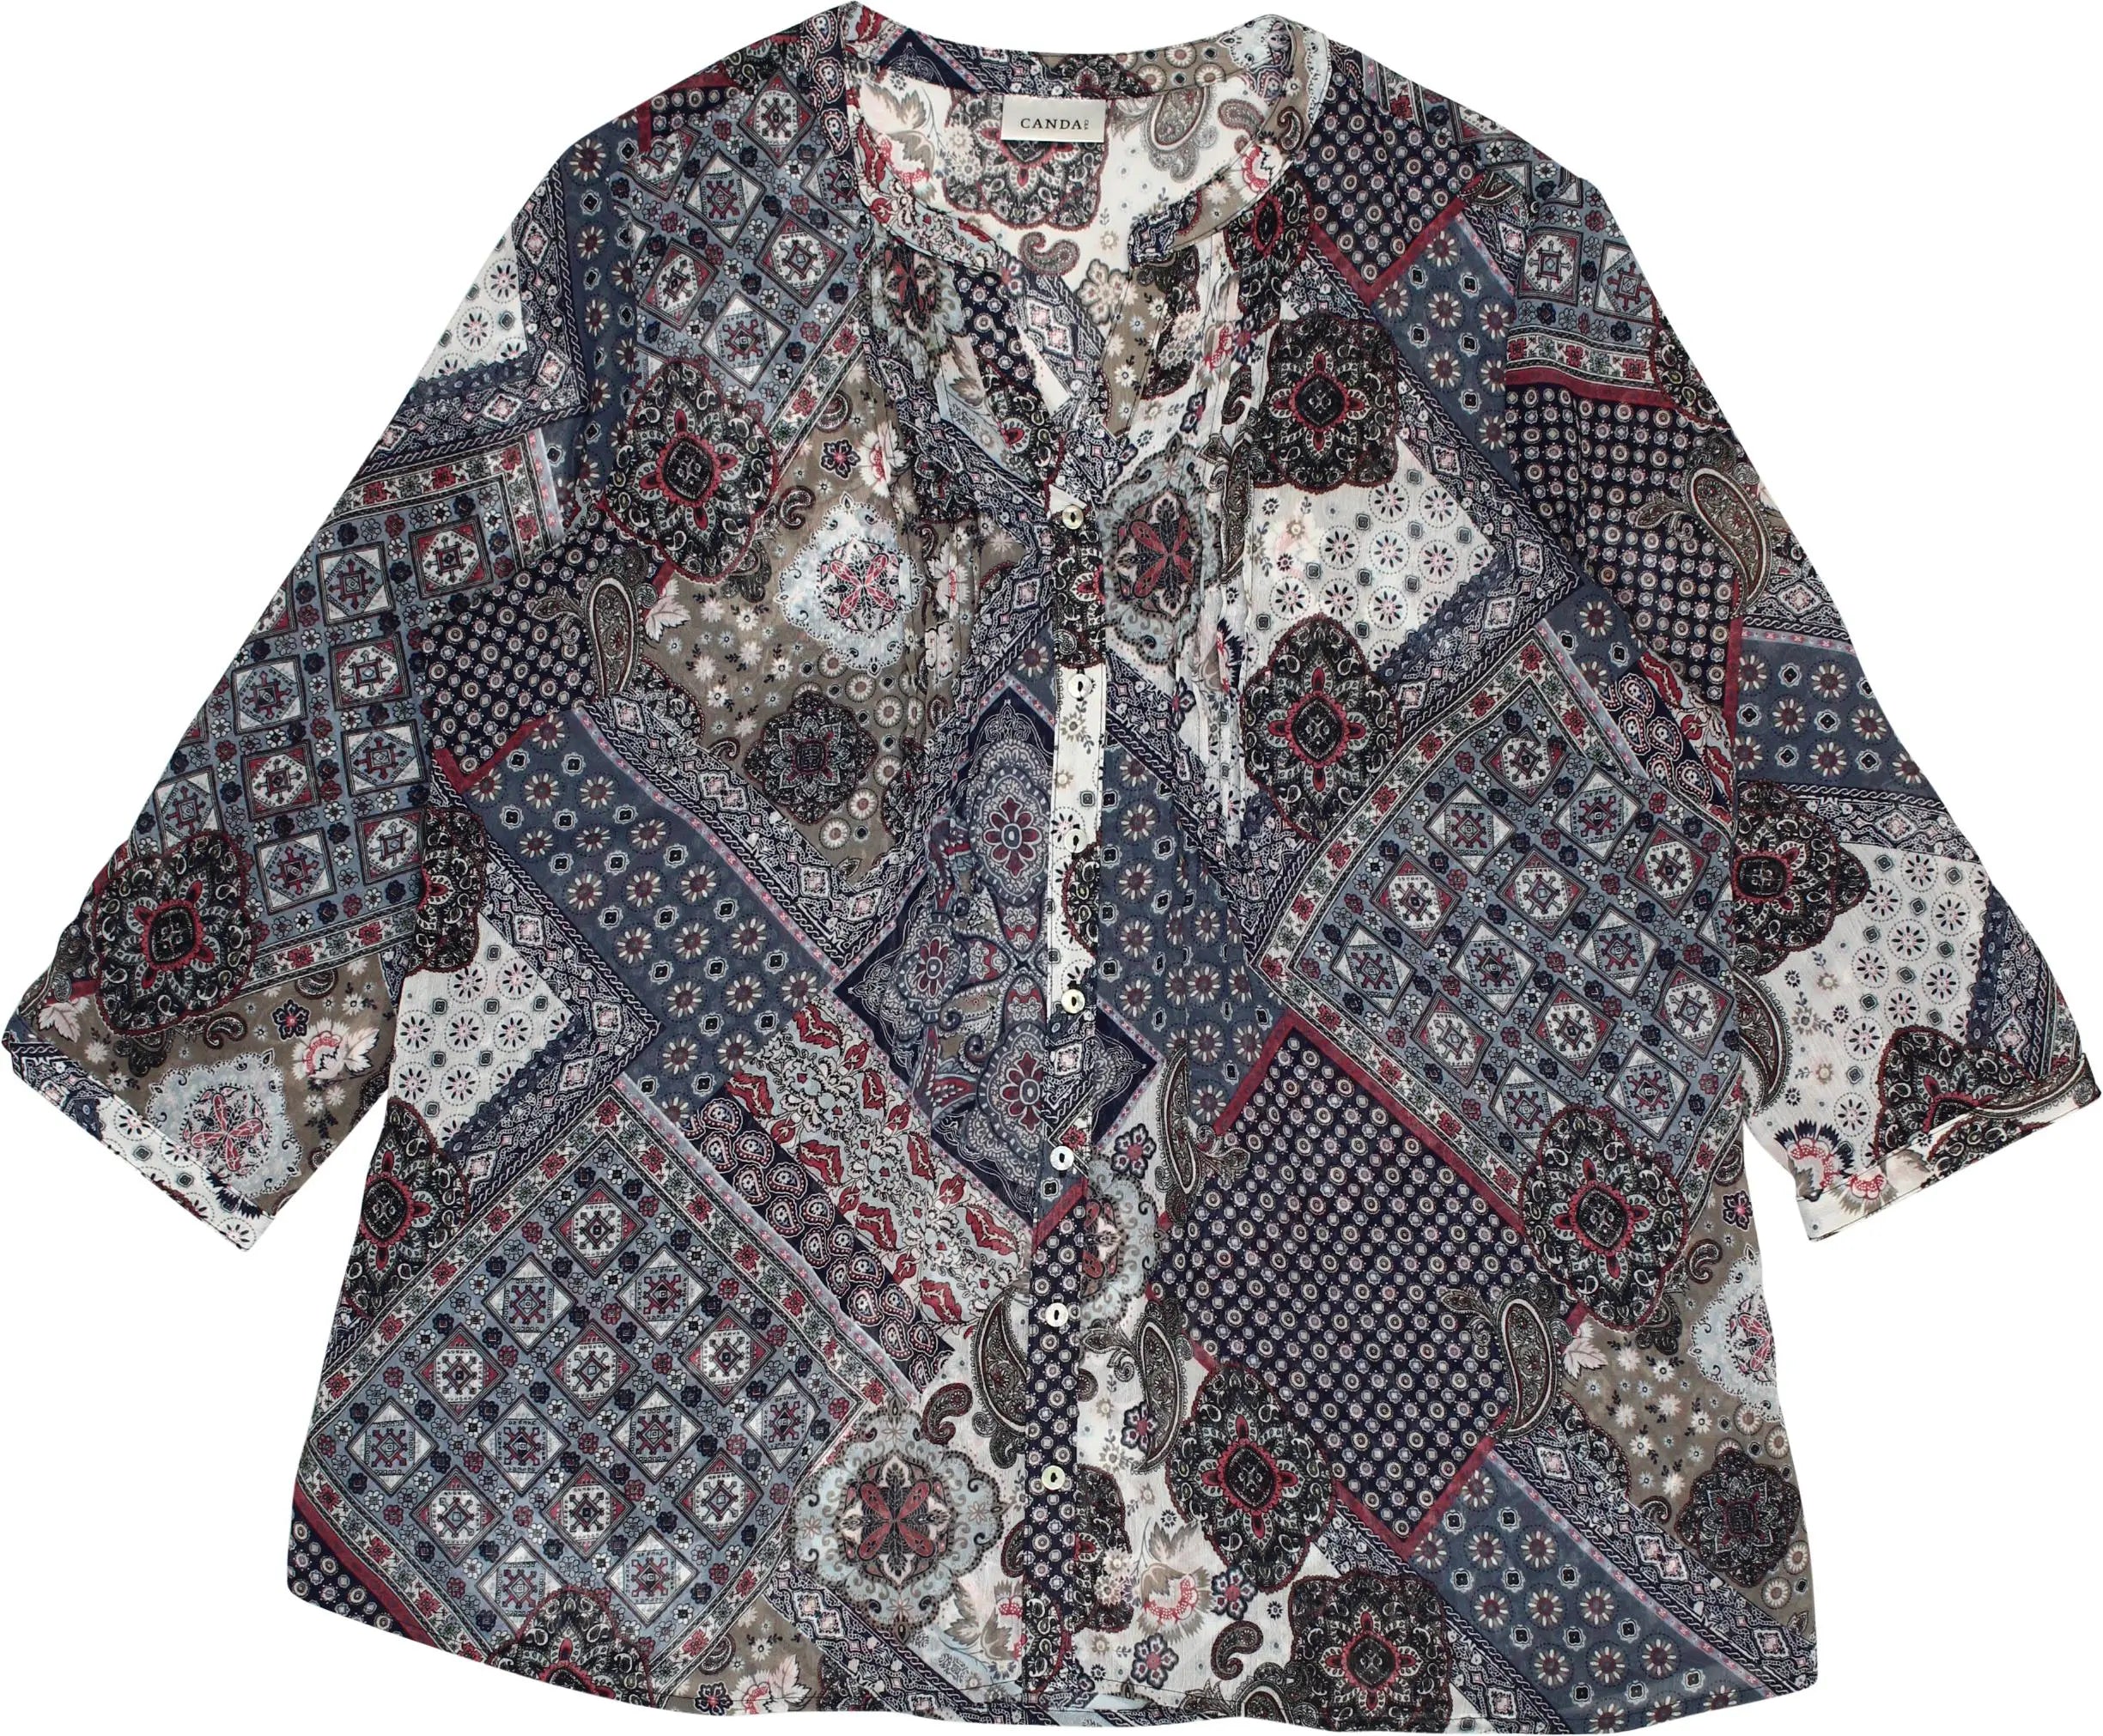 C&A - Sheer Paisley Blouse- ThriftTale.com - Vintage and second handclothing